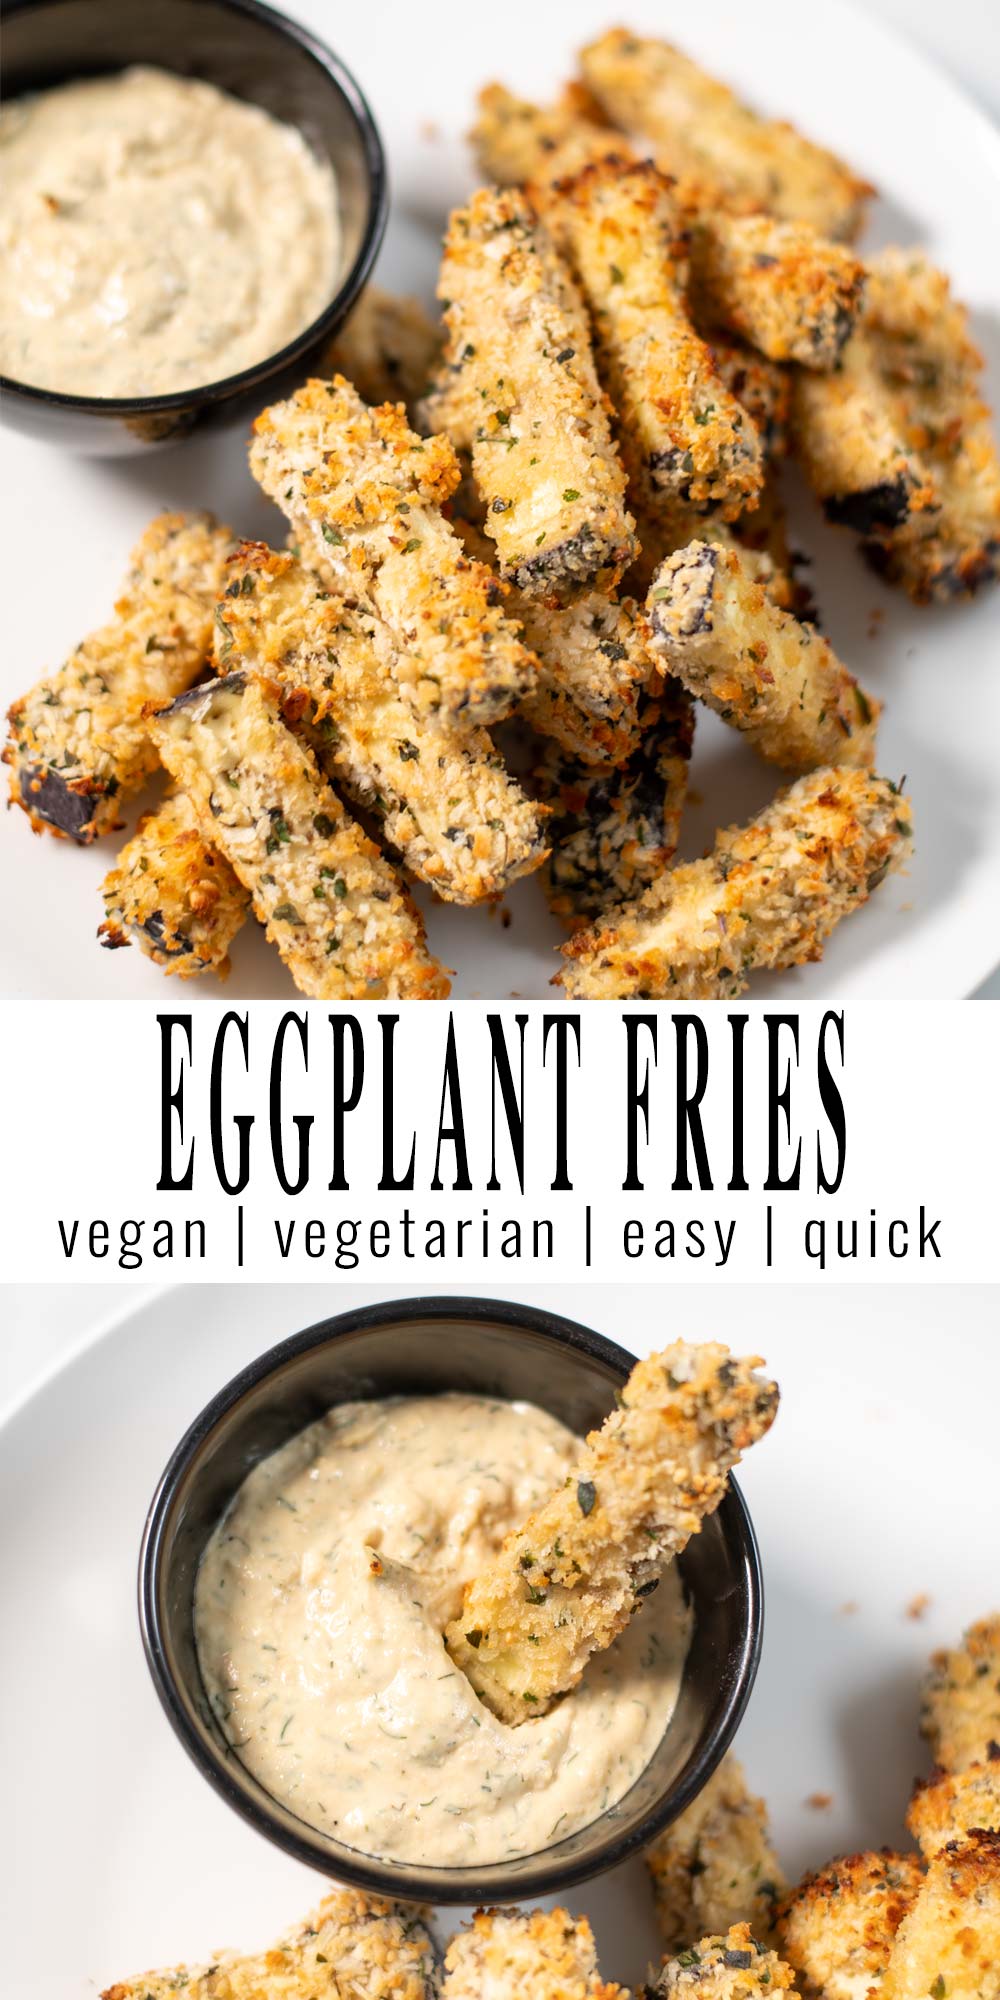 Collage of two photos of Eggplant Fries with recipe title text.